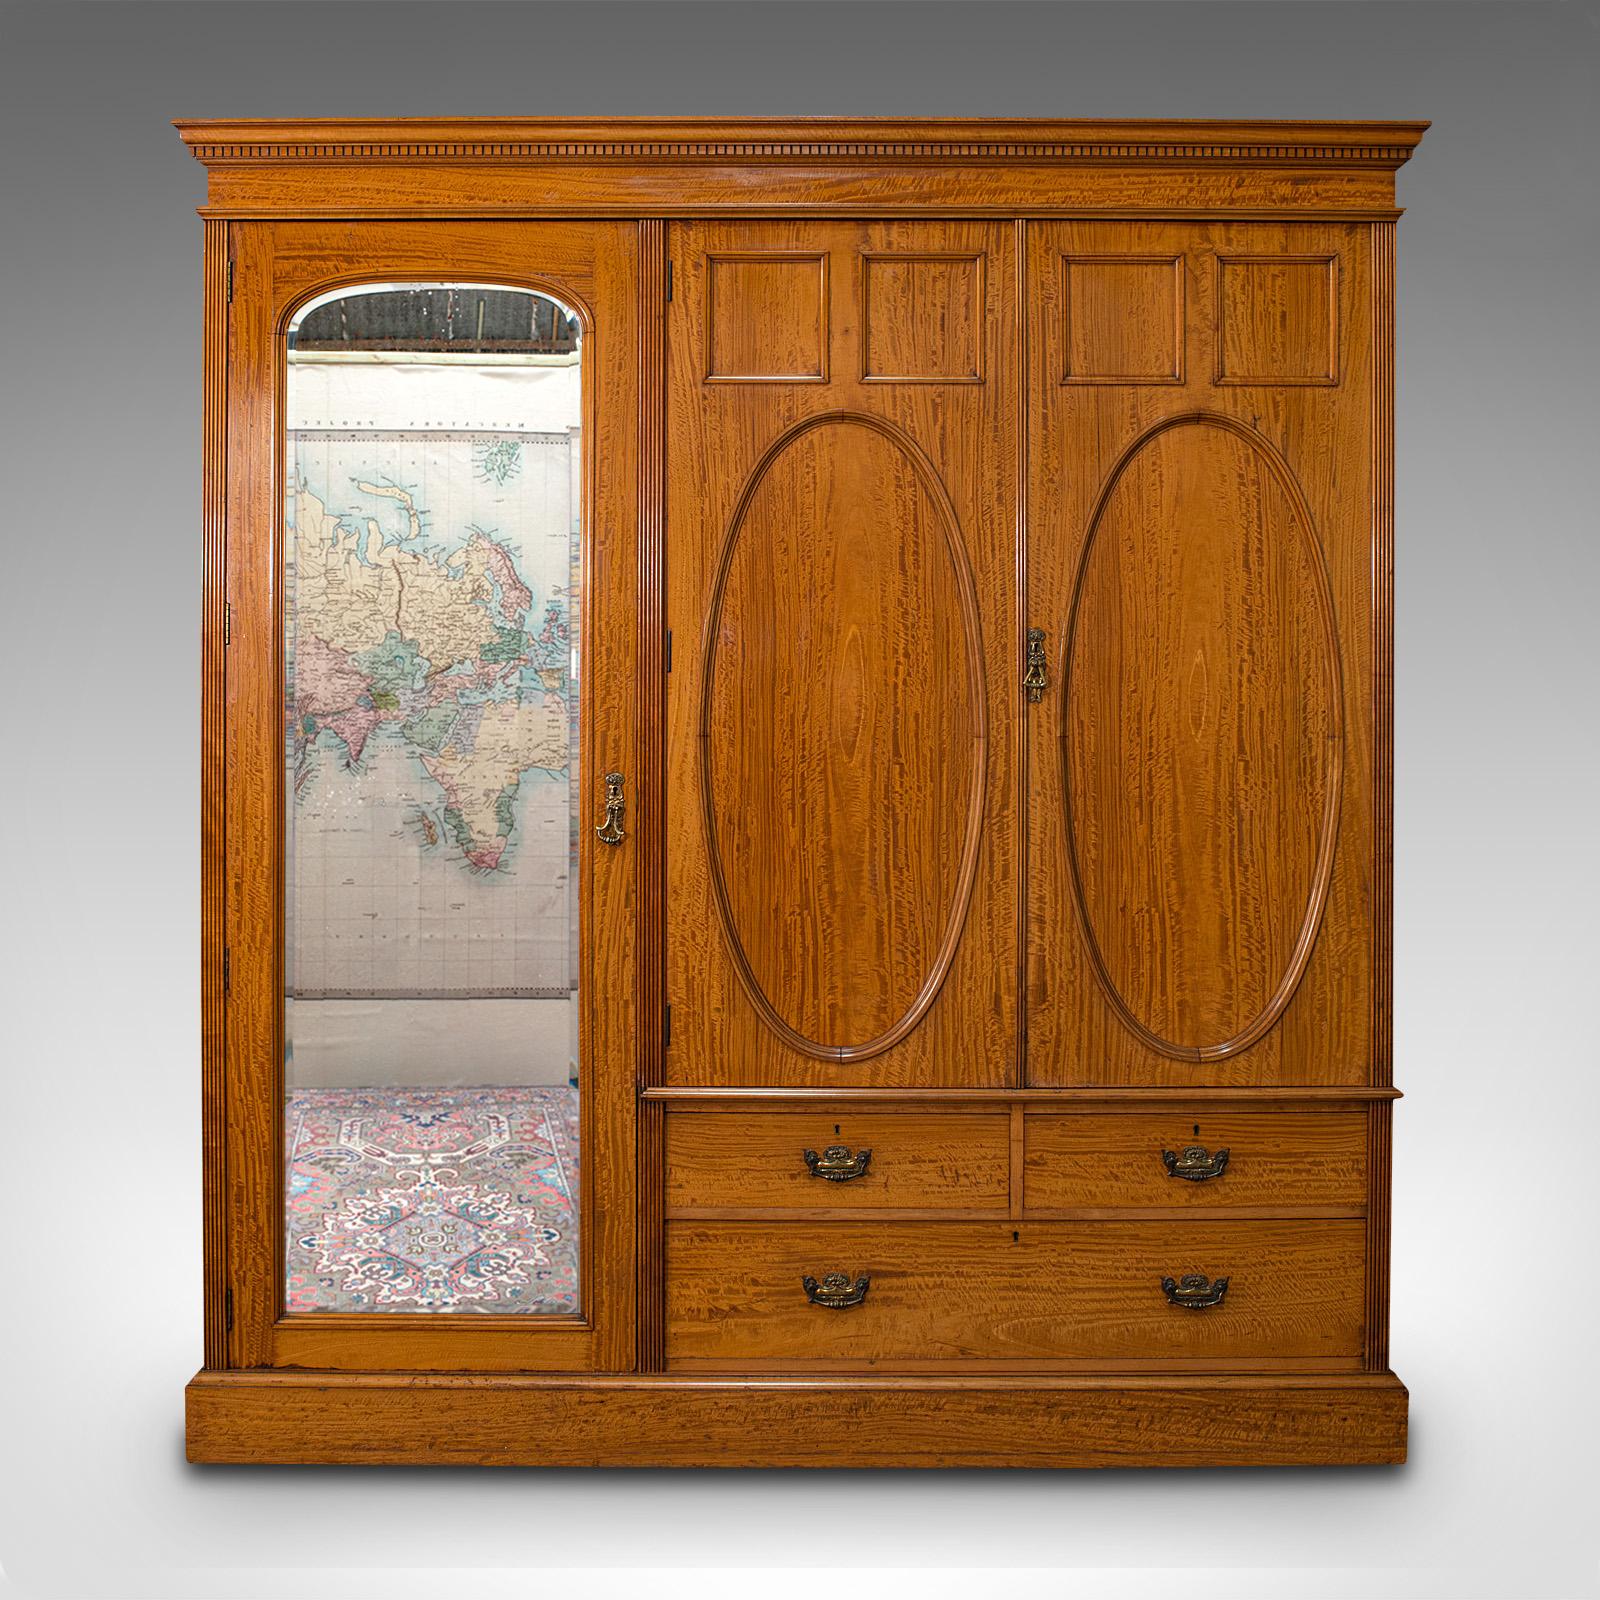 This is an antique master bedroom wardrobe. An English, satinwood over walnut linen press cupboard with dressing mirror by Maple & Co, dating to the Edwardian period, circa 1910.

Exquisite Edwardian craftsmanship as to be expected of Maple & Co,